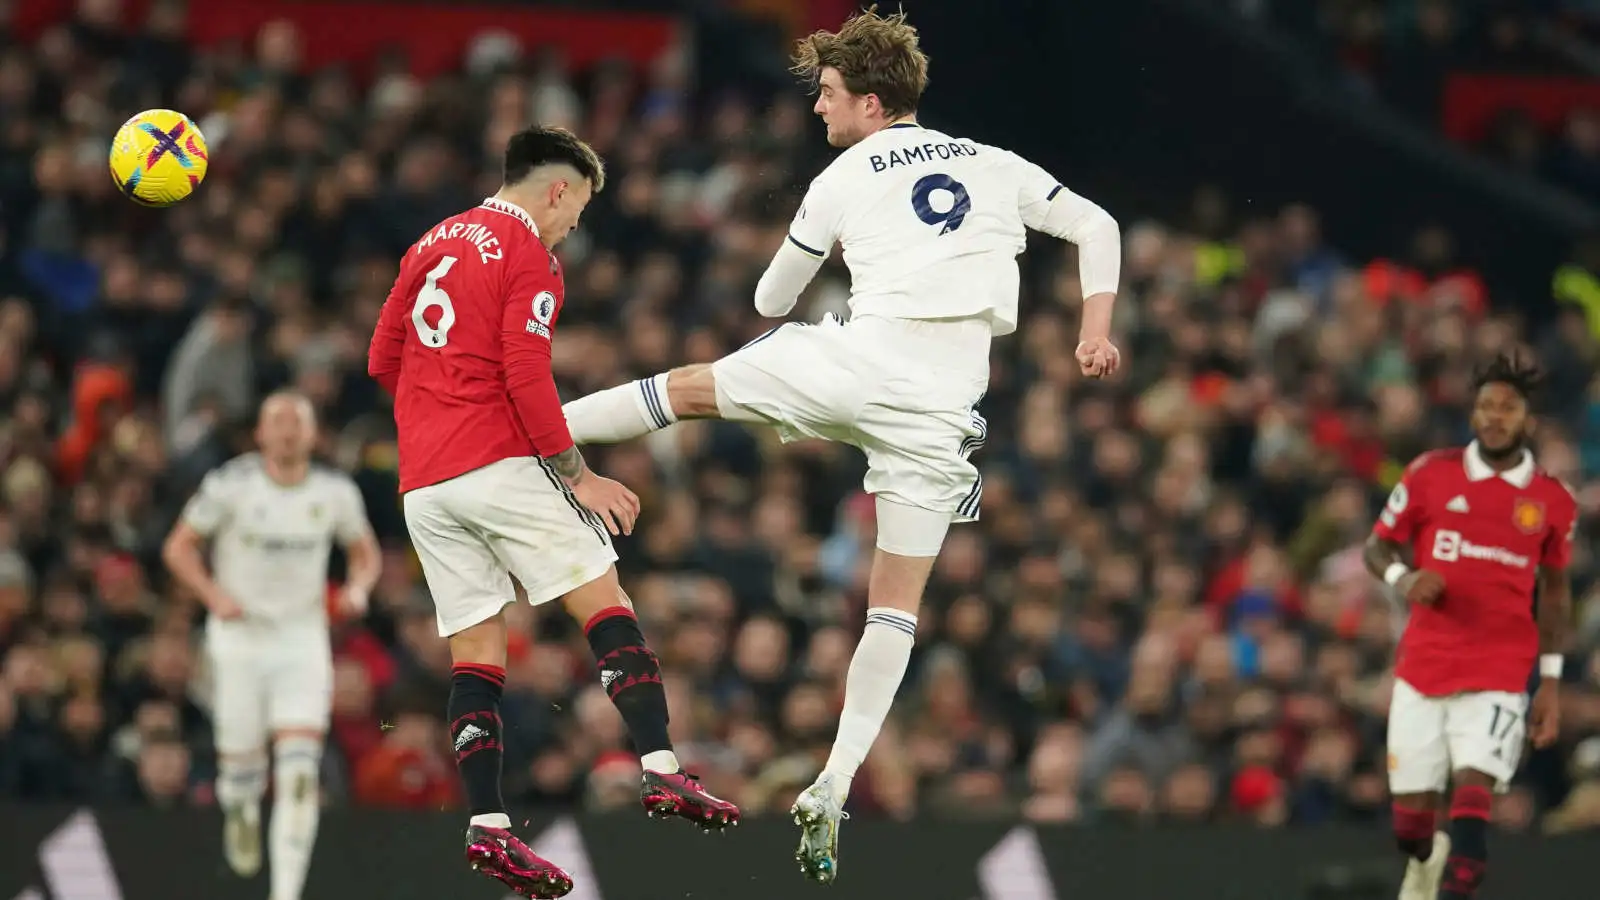 Lisandro Martinez and Patrick Bamfford challenge for the ball during the Premier League match between Manchester United and Leeds United